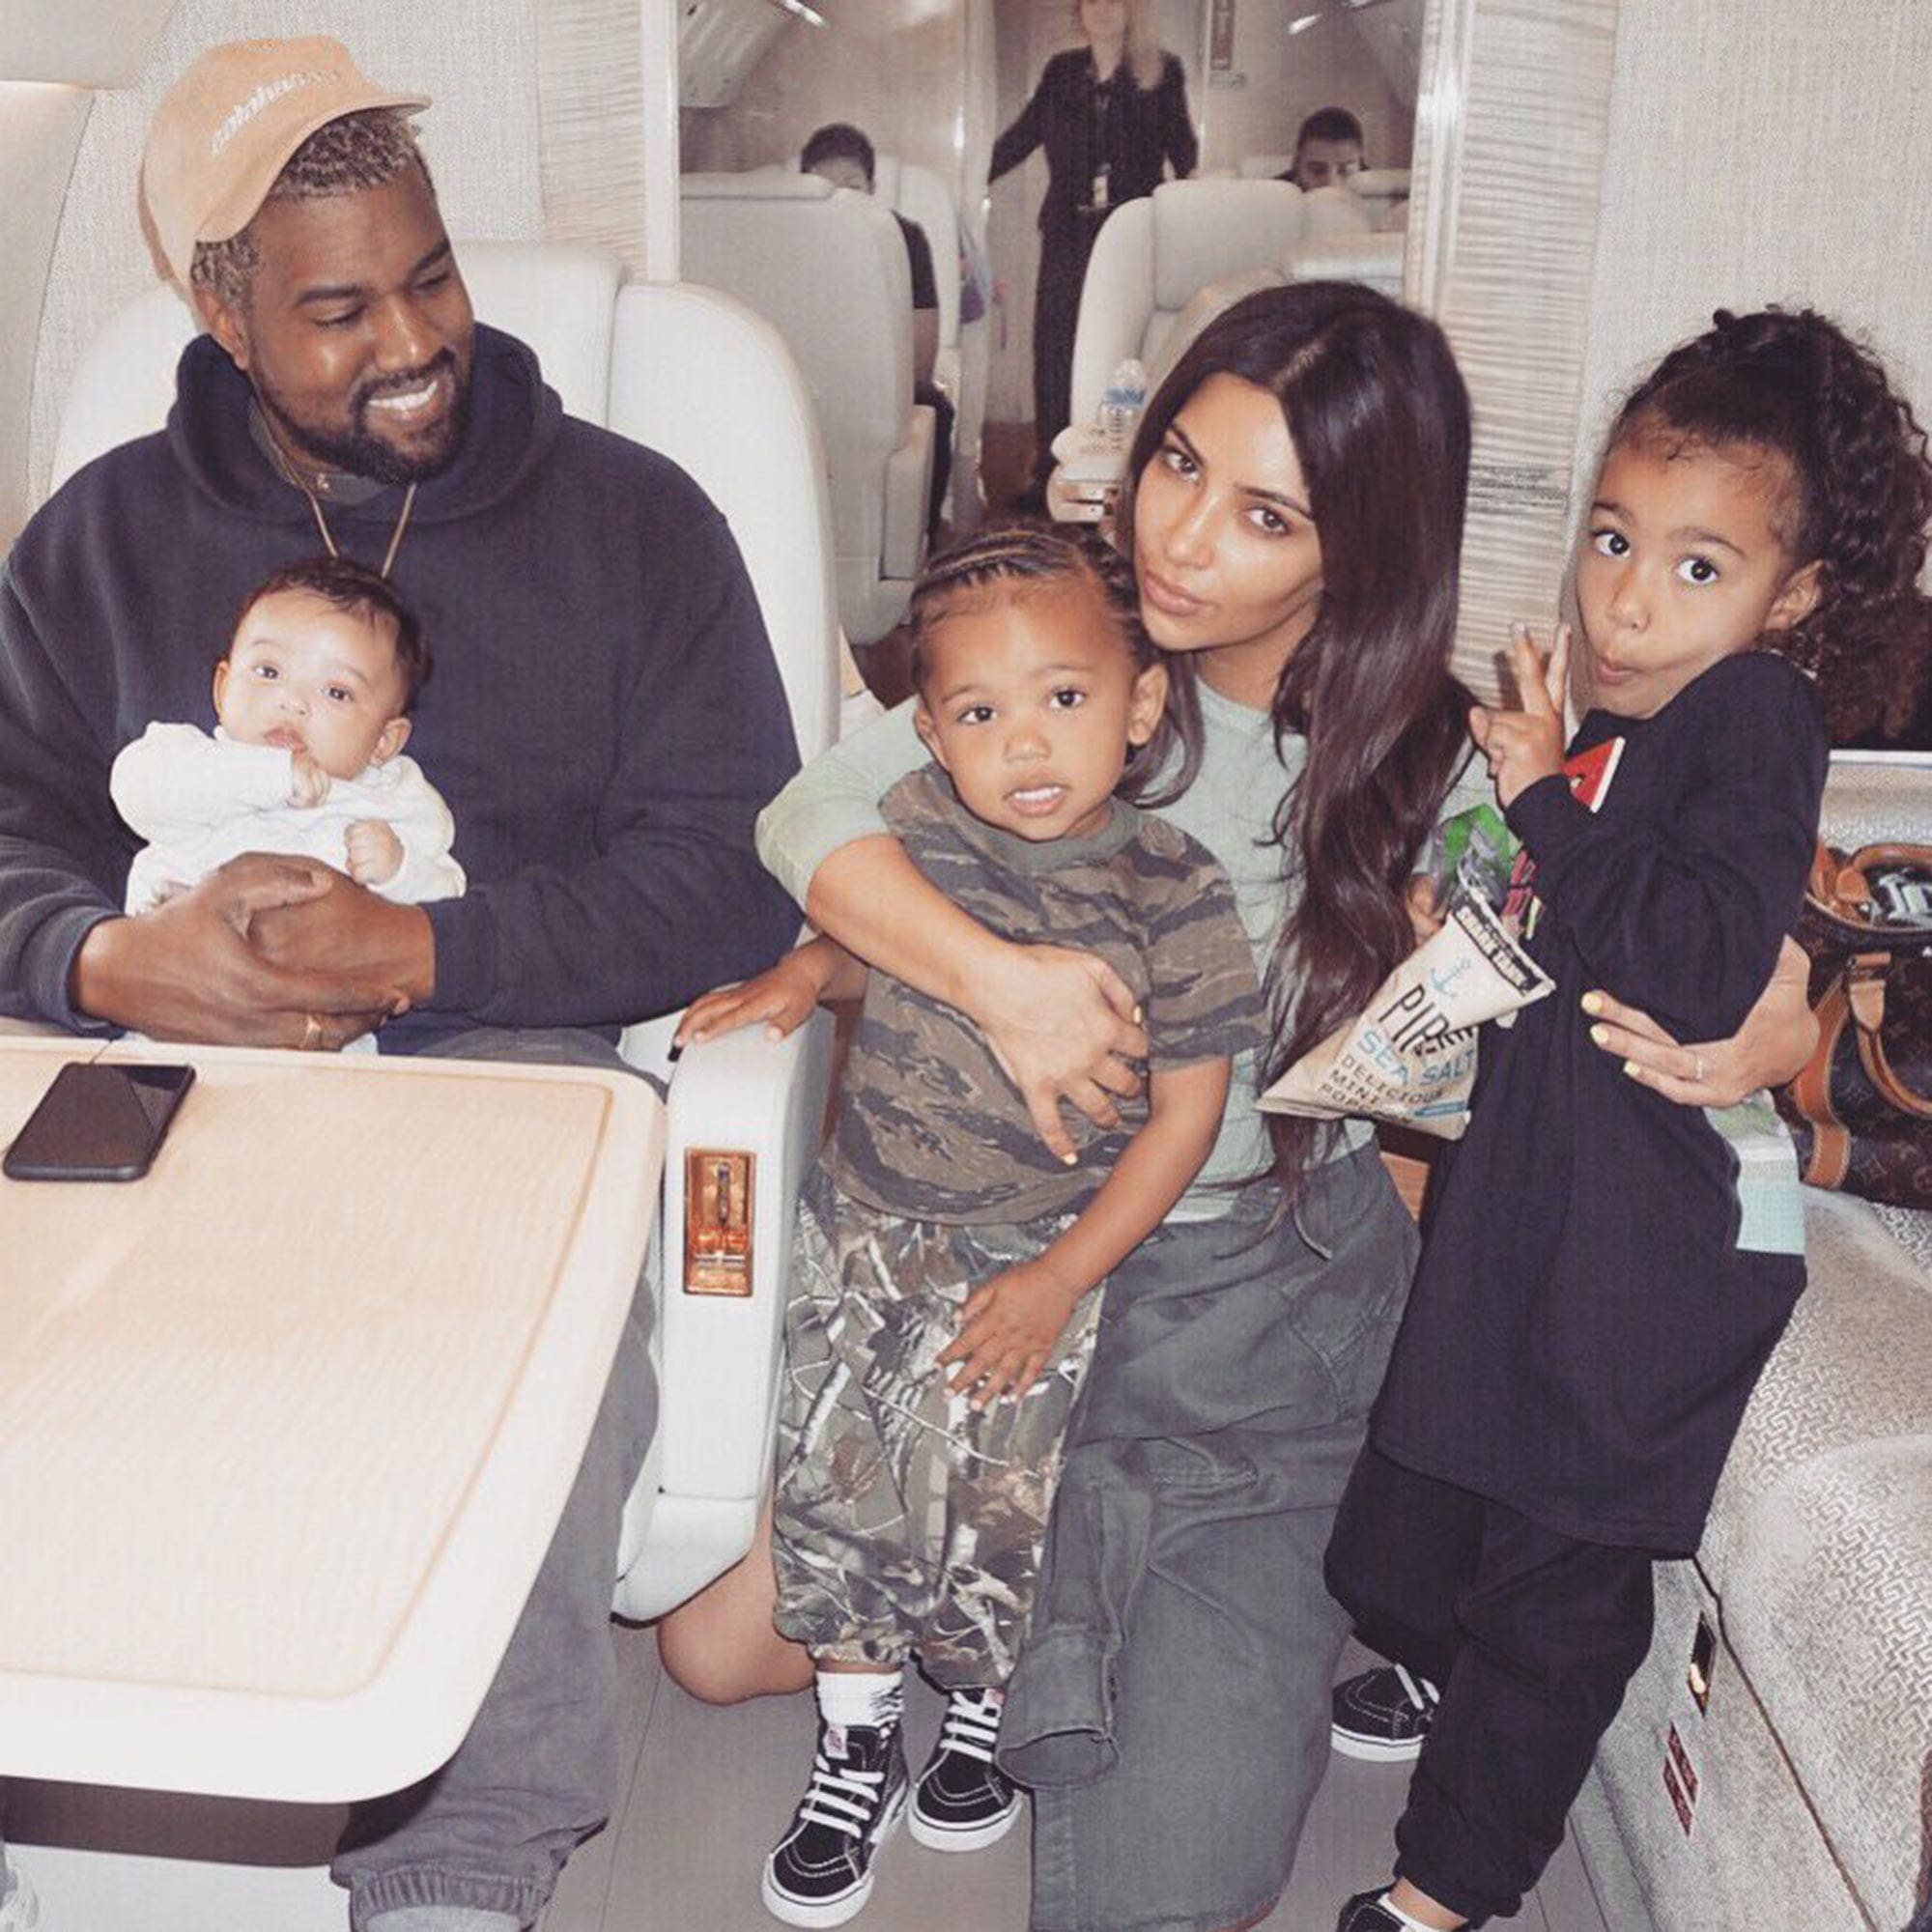 Kim Kardashian Will Not Allow KUWTK To Film Kanye West And The Kids Amidst The Massive Drama